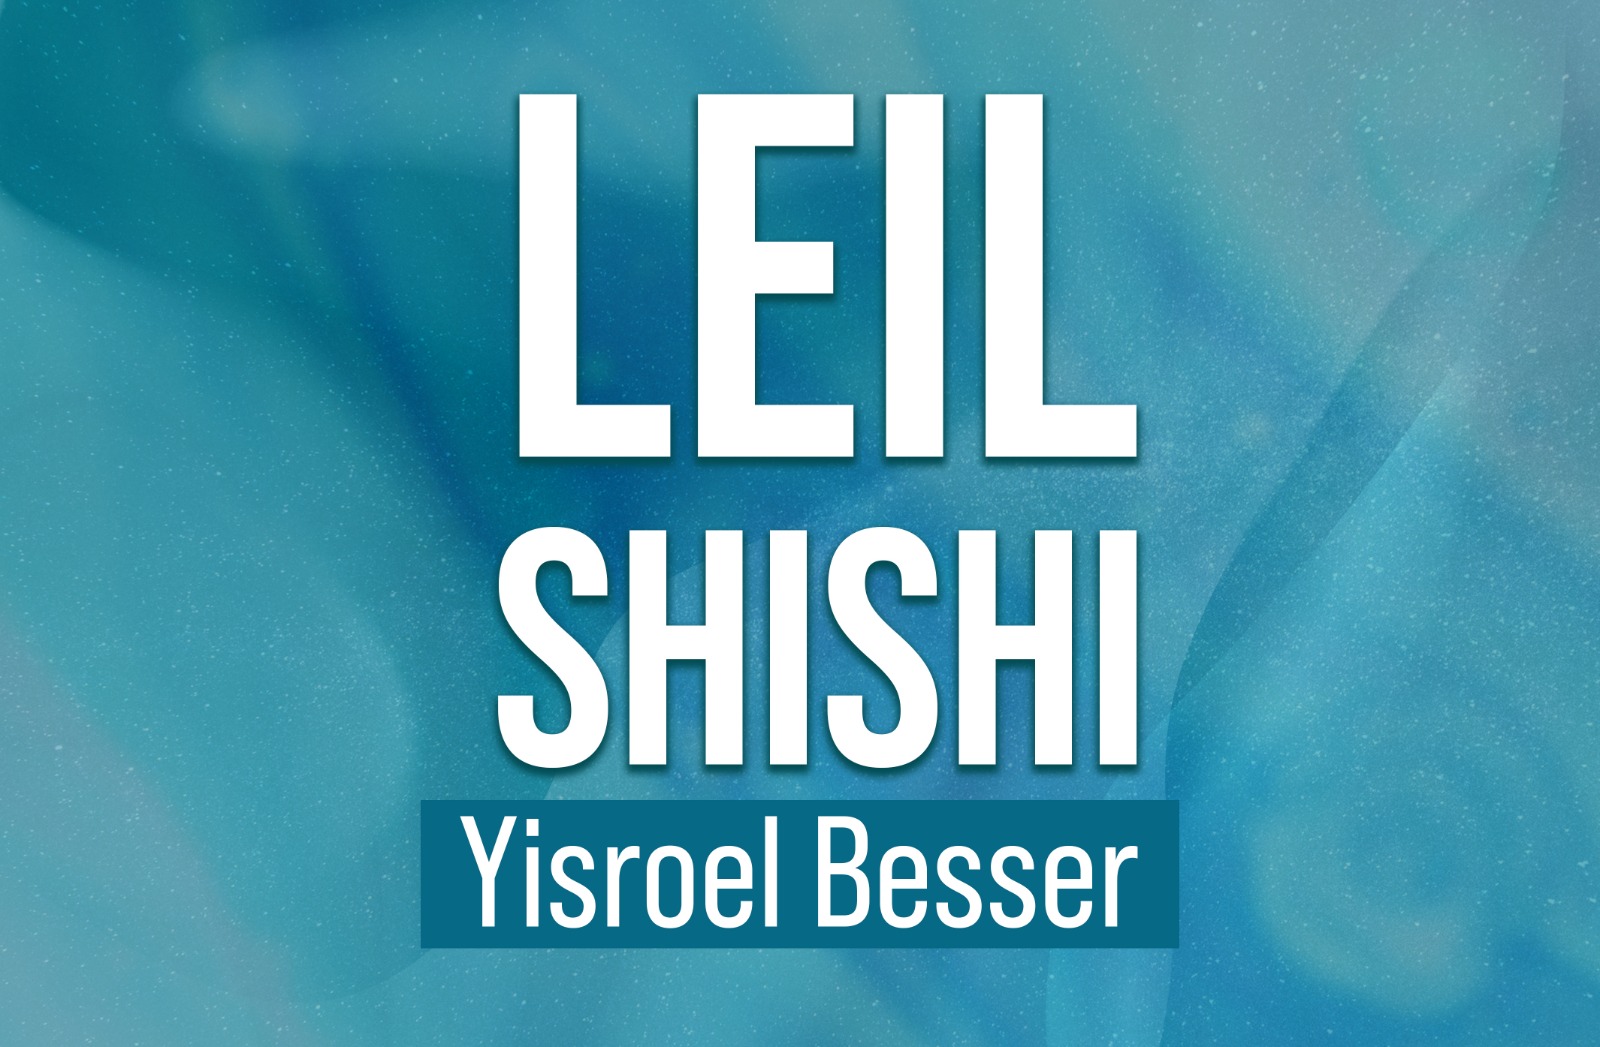 NEW! The First Unwanted Child: Leil Shishi with Yisroel Besser